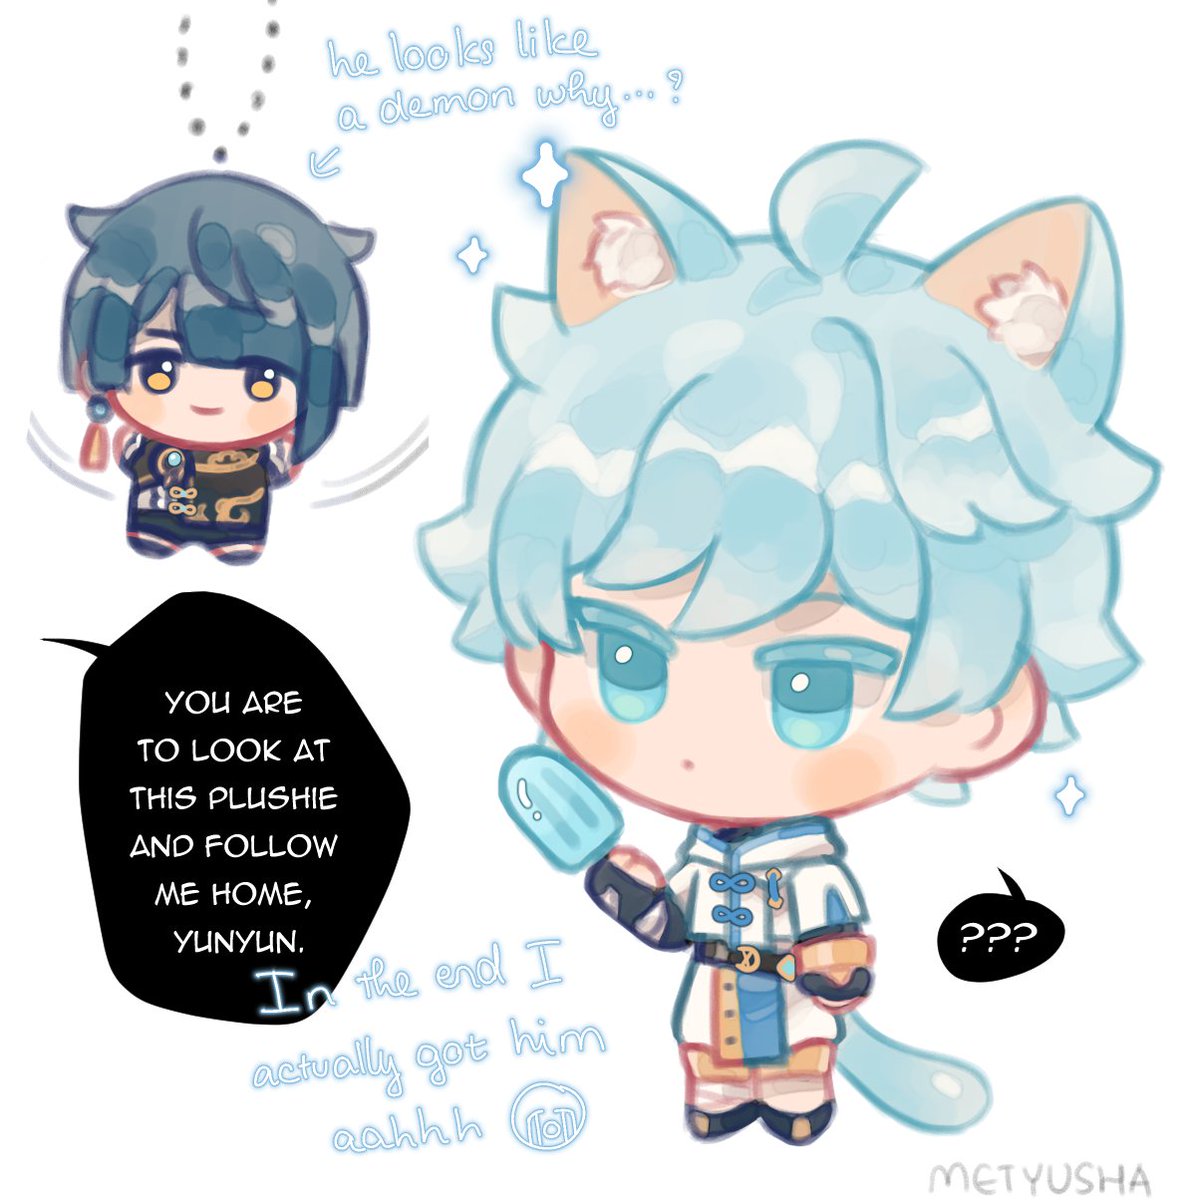 The moment i got Chongyun, I realised I don't have any mora or hero's wit left for him. So he is gonna be this tiny Yunyun for a while in my team lmao. 
Tiny, but he has a big heart for Xingqiu 😔💓

#GenshinImpact #chongyun #xingqiu #bennett #kazuha 